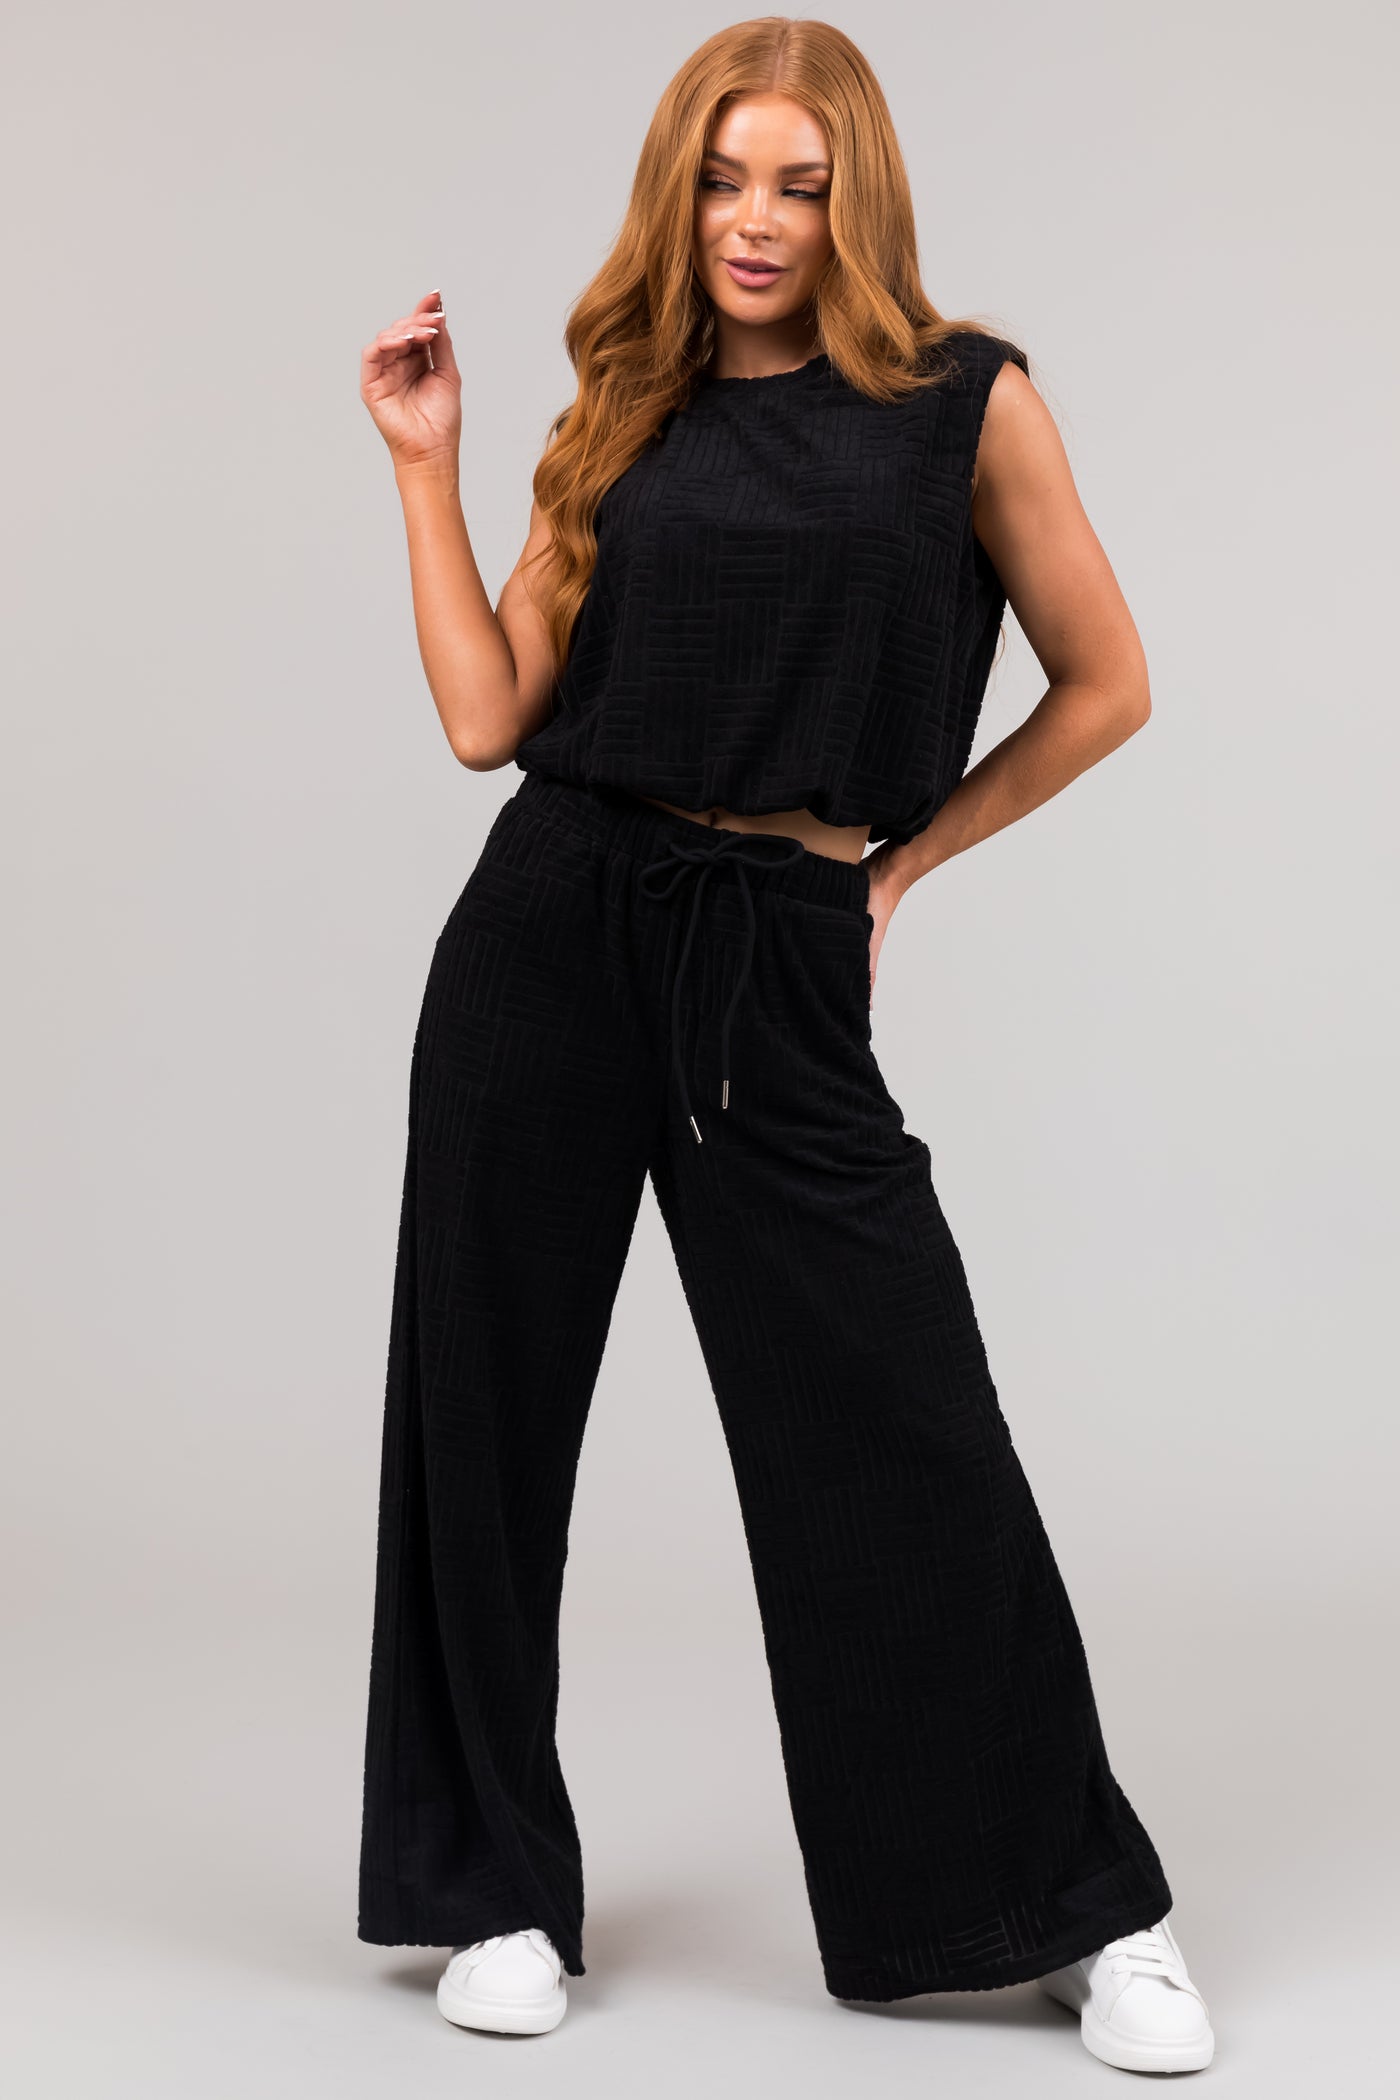 Black High Rise Wide Leg Pants with Pockets